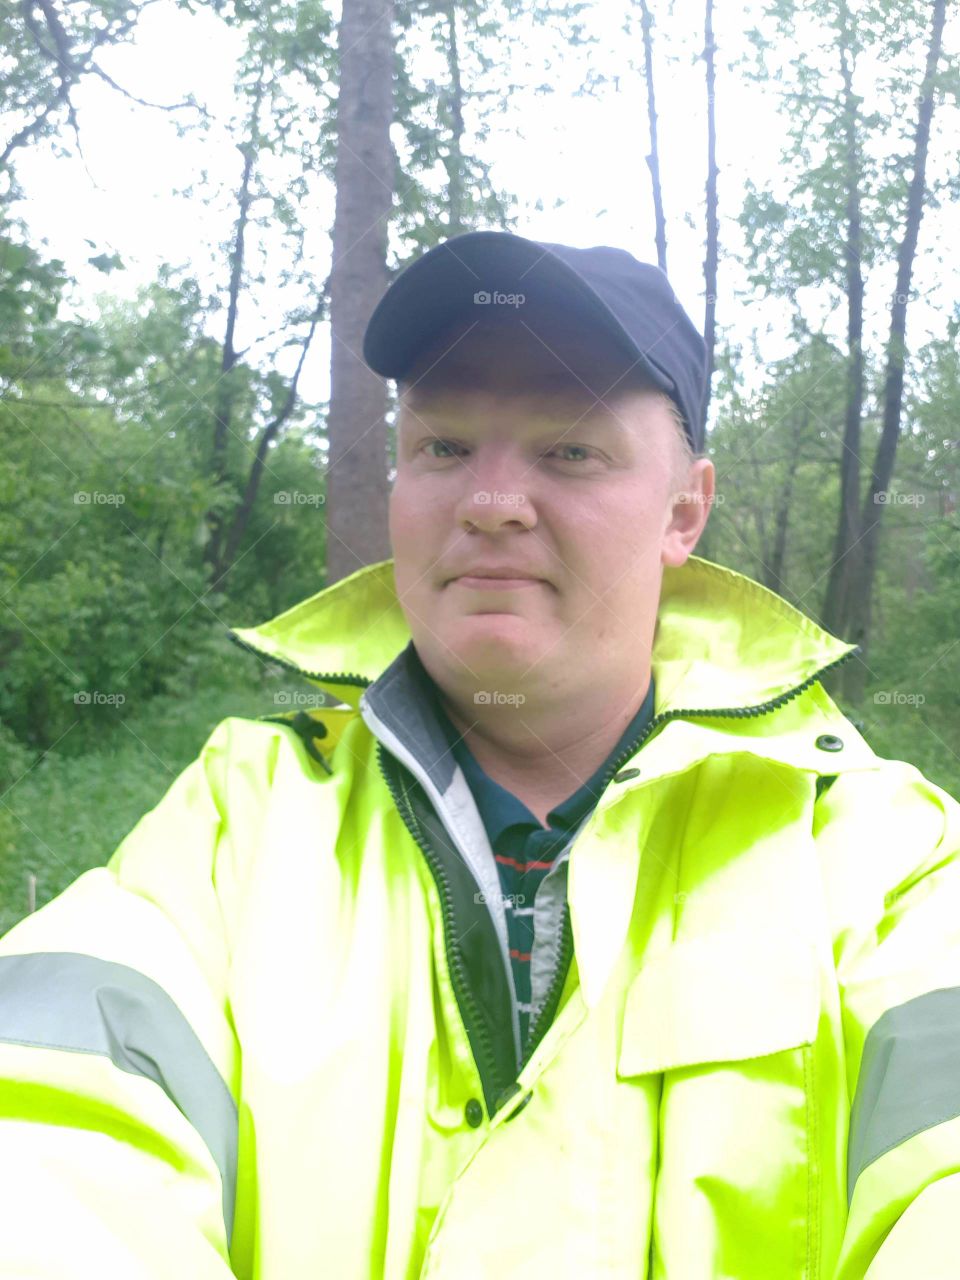 A man in a green jacket and a black cap against a leafy forest